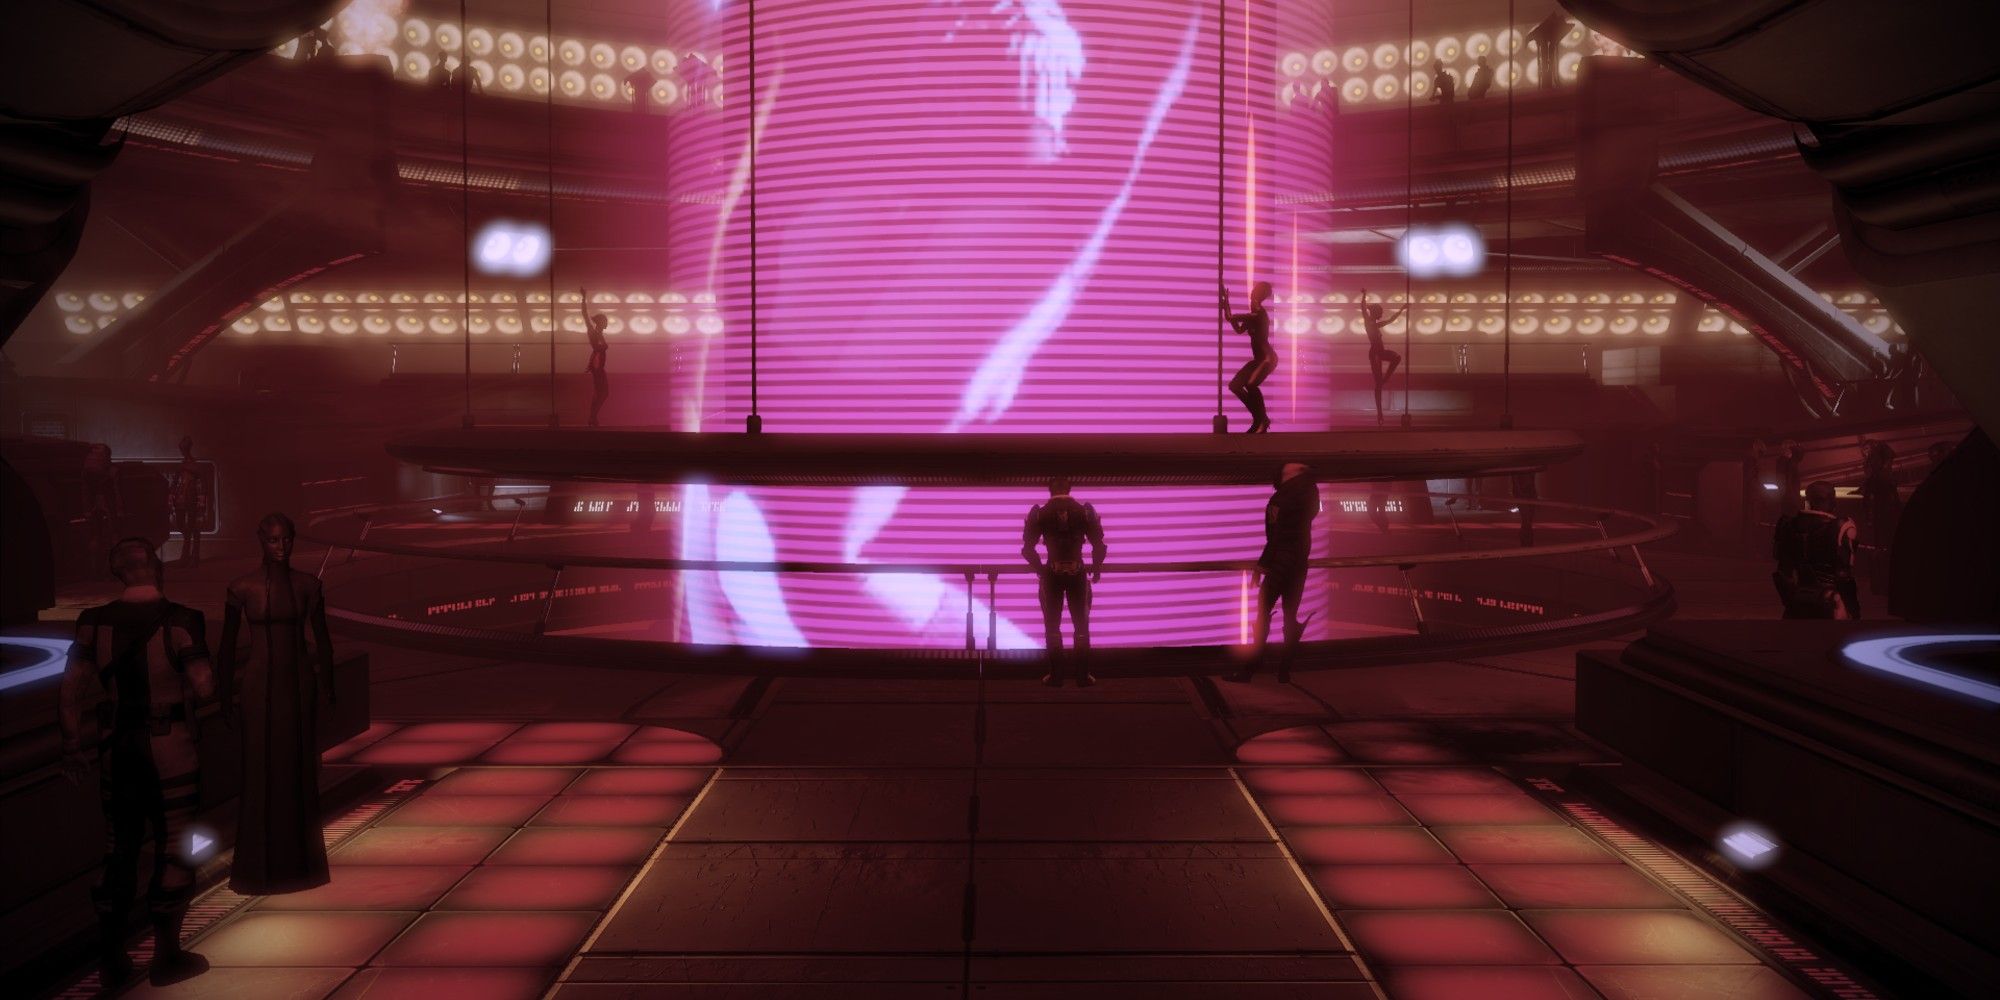 The VIP Section of the Afterlife nightclub on Omega in Mass Effect 2